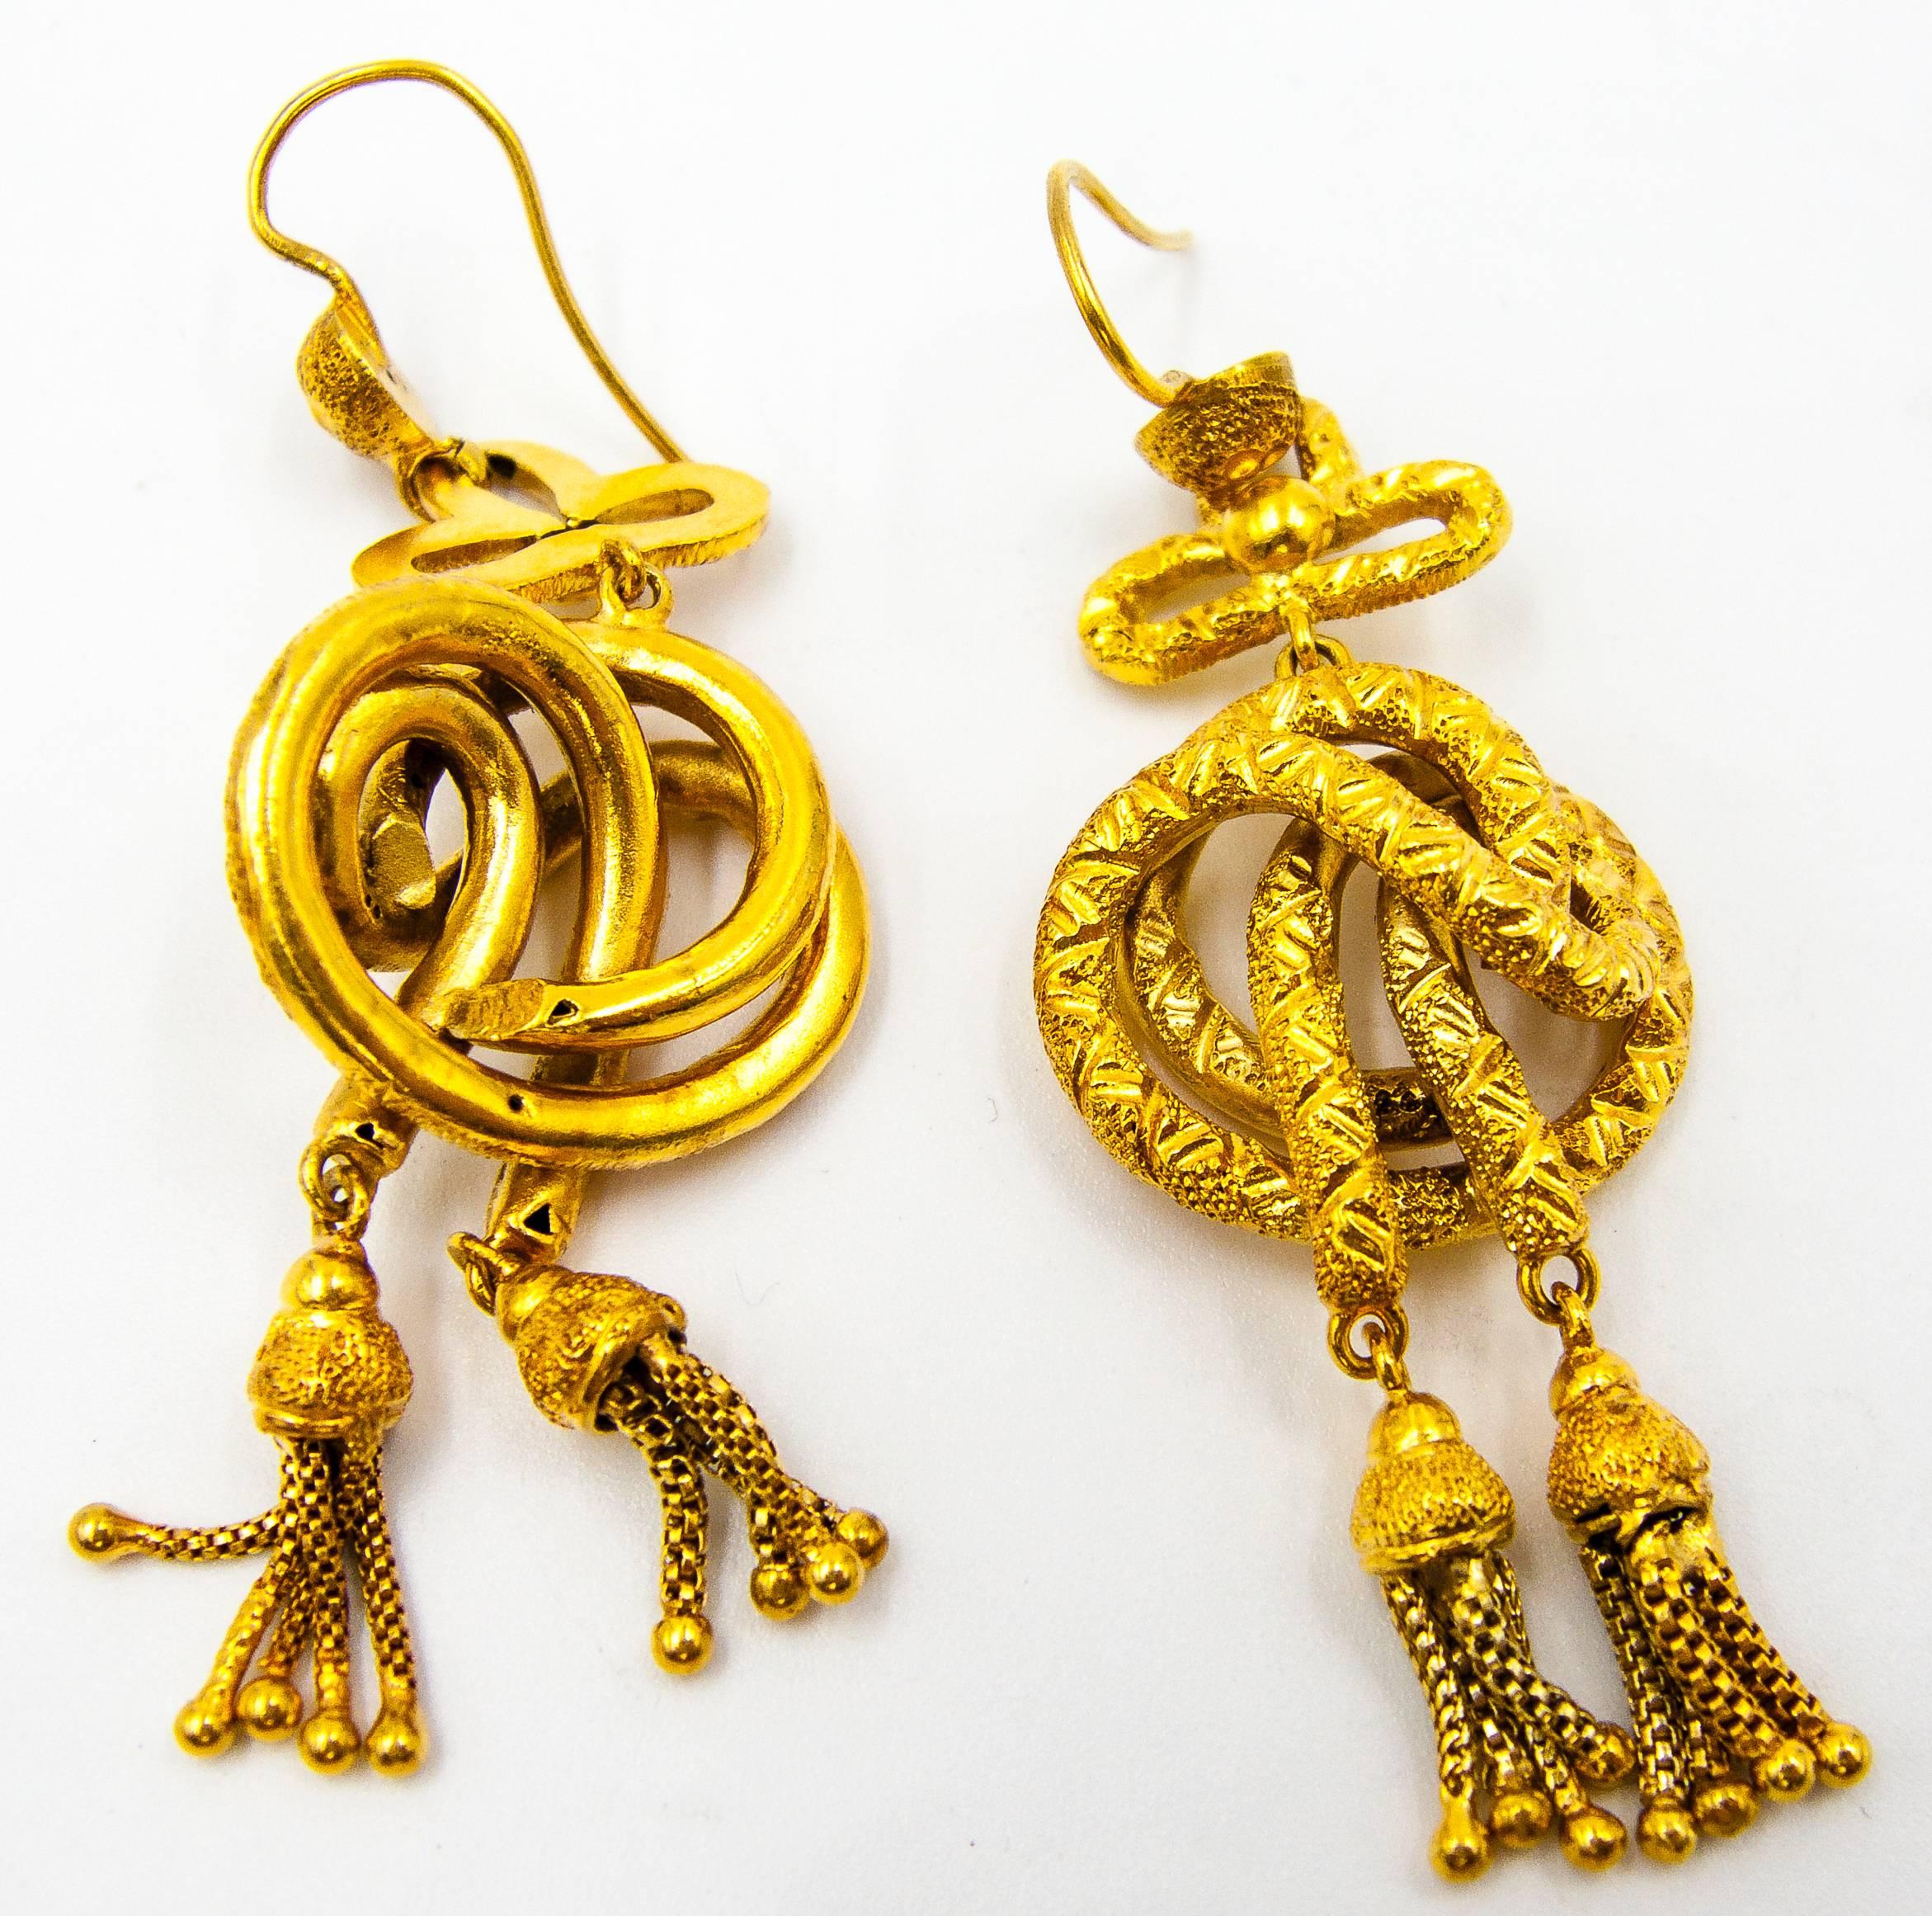    Unique and feminine, these elegant Victorian earrings are perfect for day or evening wear.   They're 2 1/2 inches in length, and the bottom tassels move gently as you wear them.  Definitely for the confident collector of Victorian earrings and a